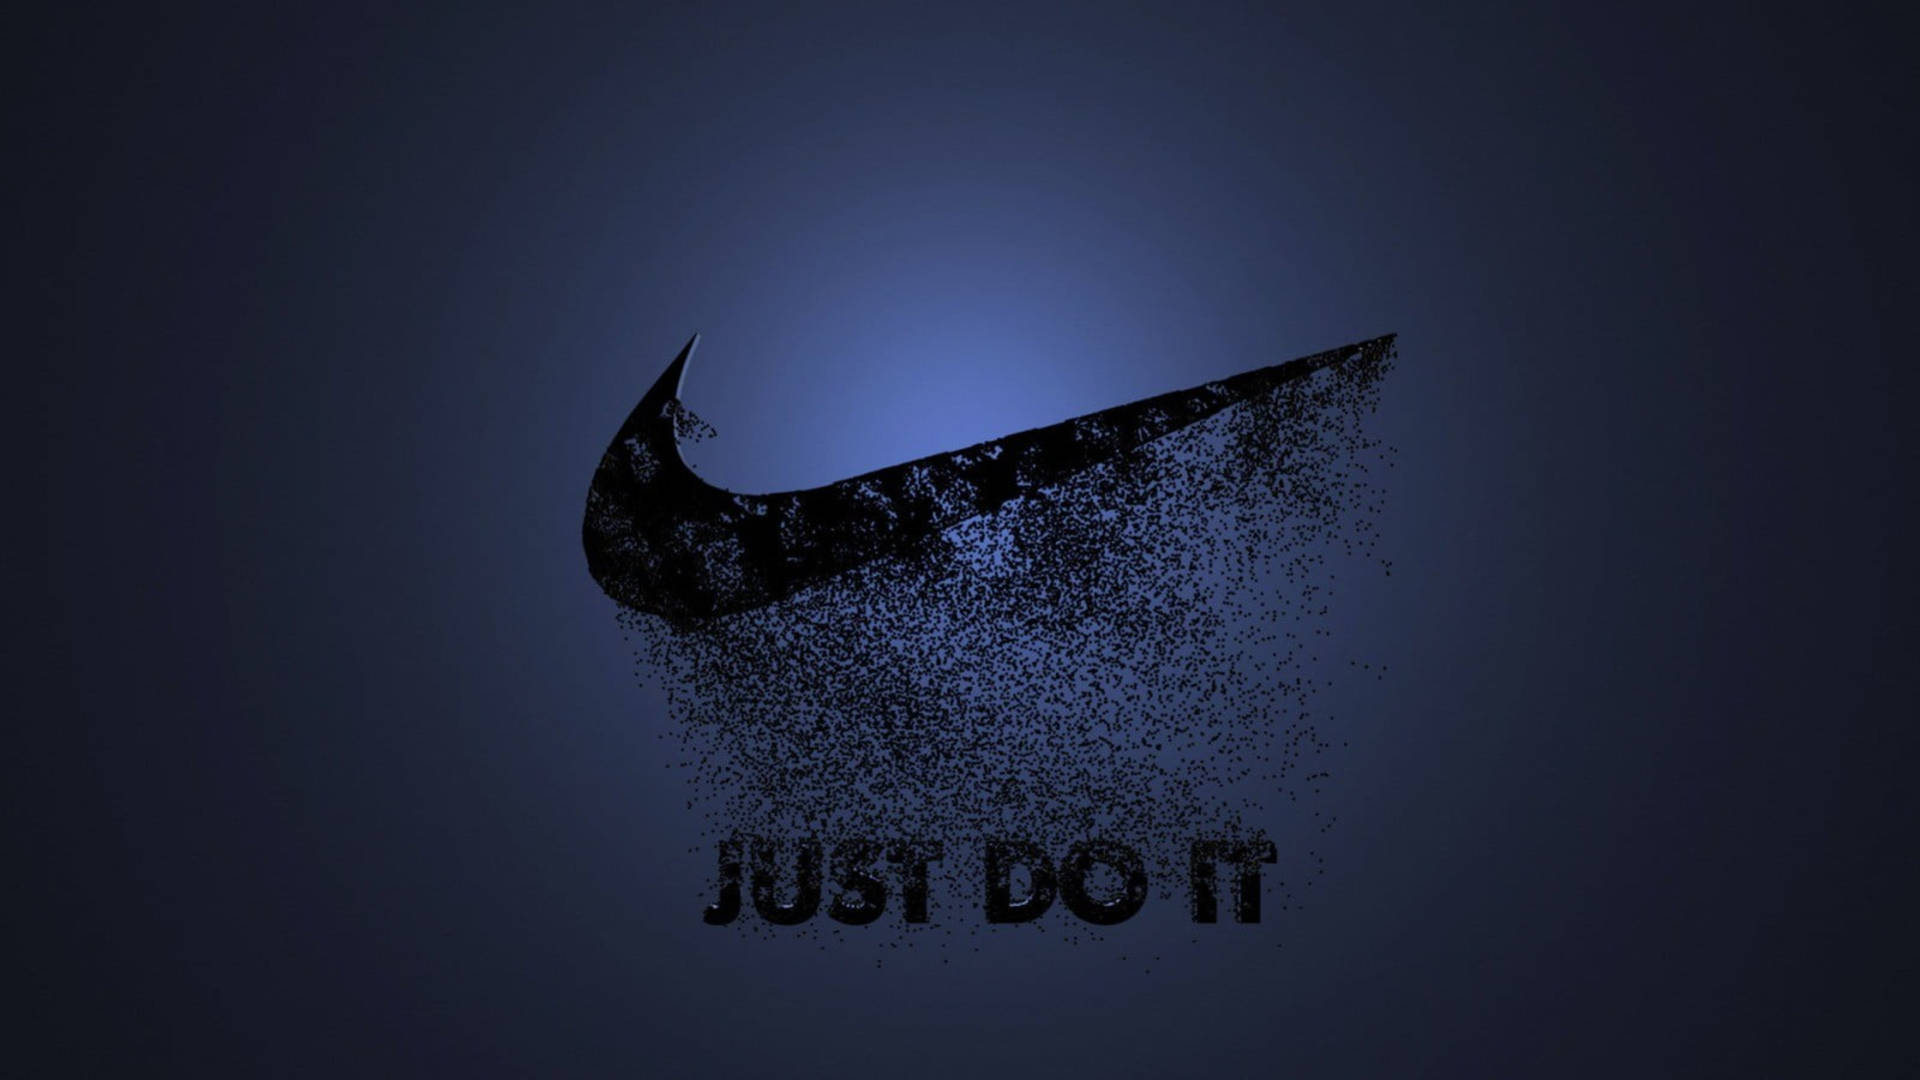 Just Do It Wallpaper Images